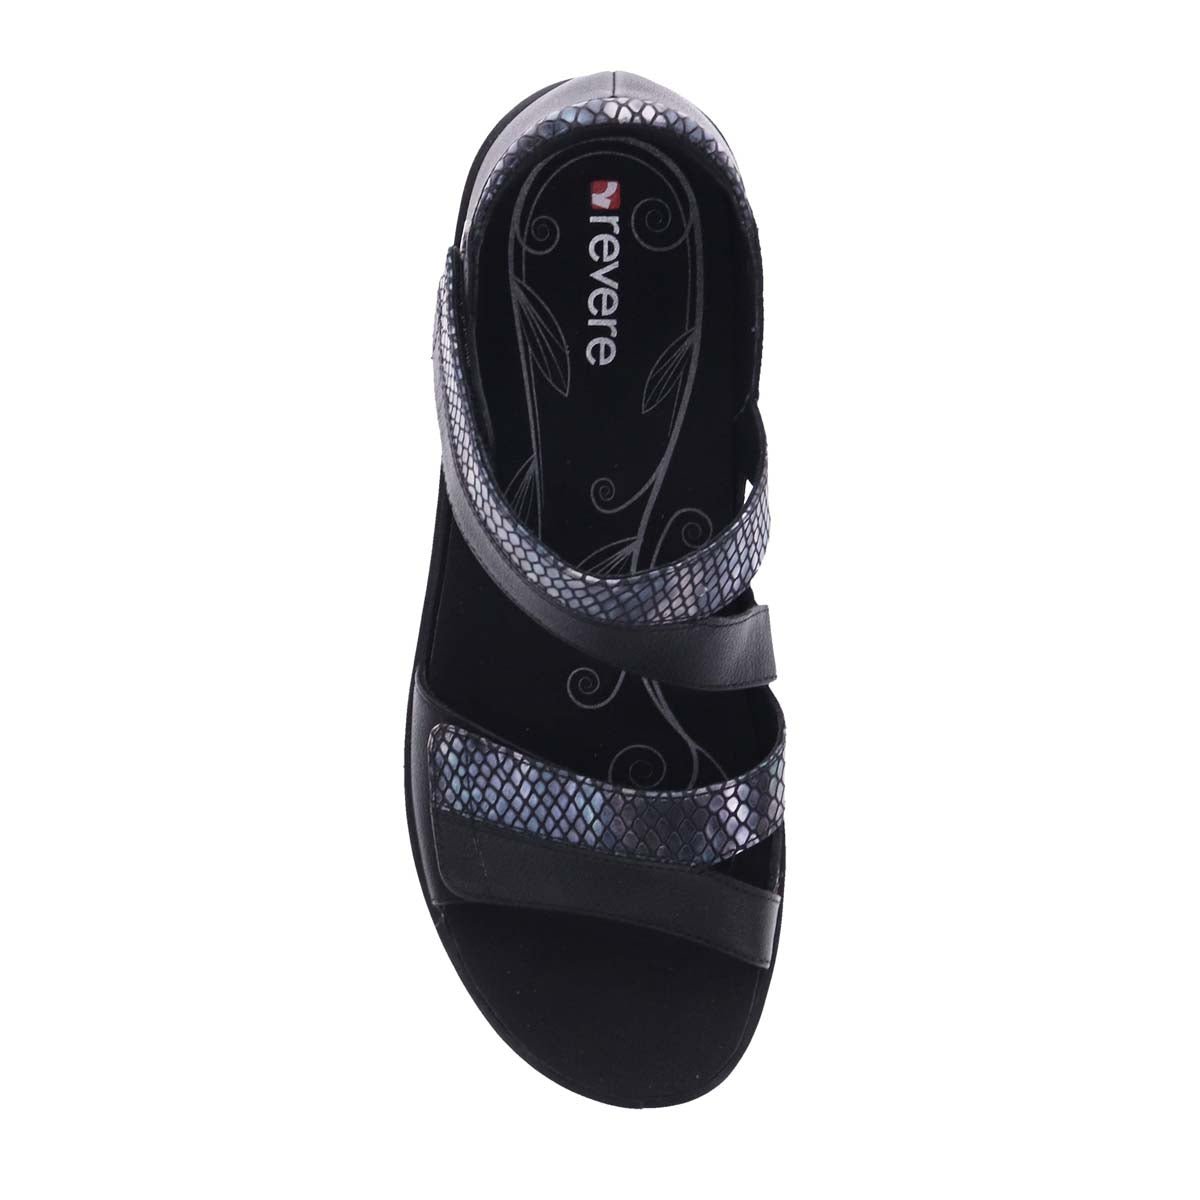 REVERE MAURITIUS WOMEN SANDALS IN BLACK/SLATE INTEREST - TLW Shoes